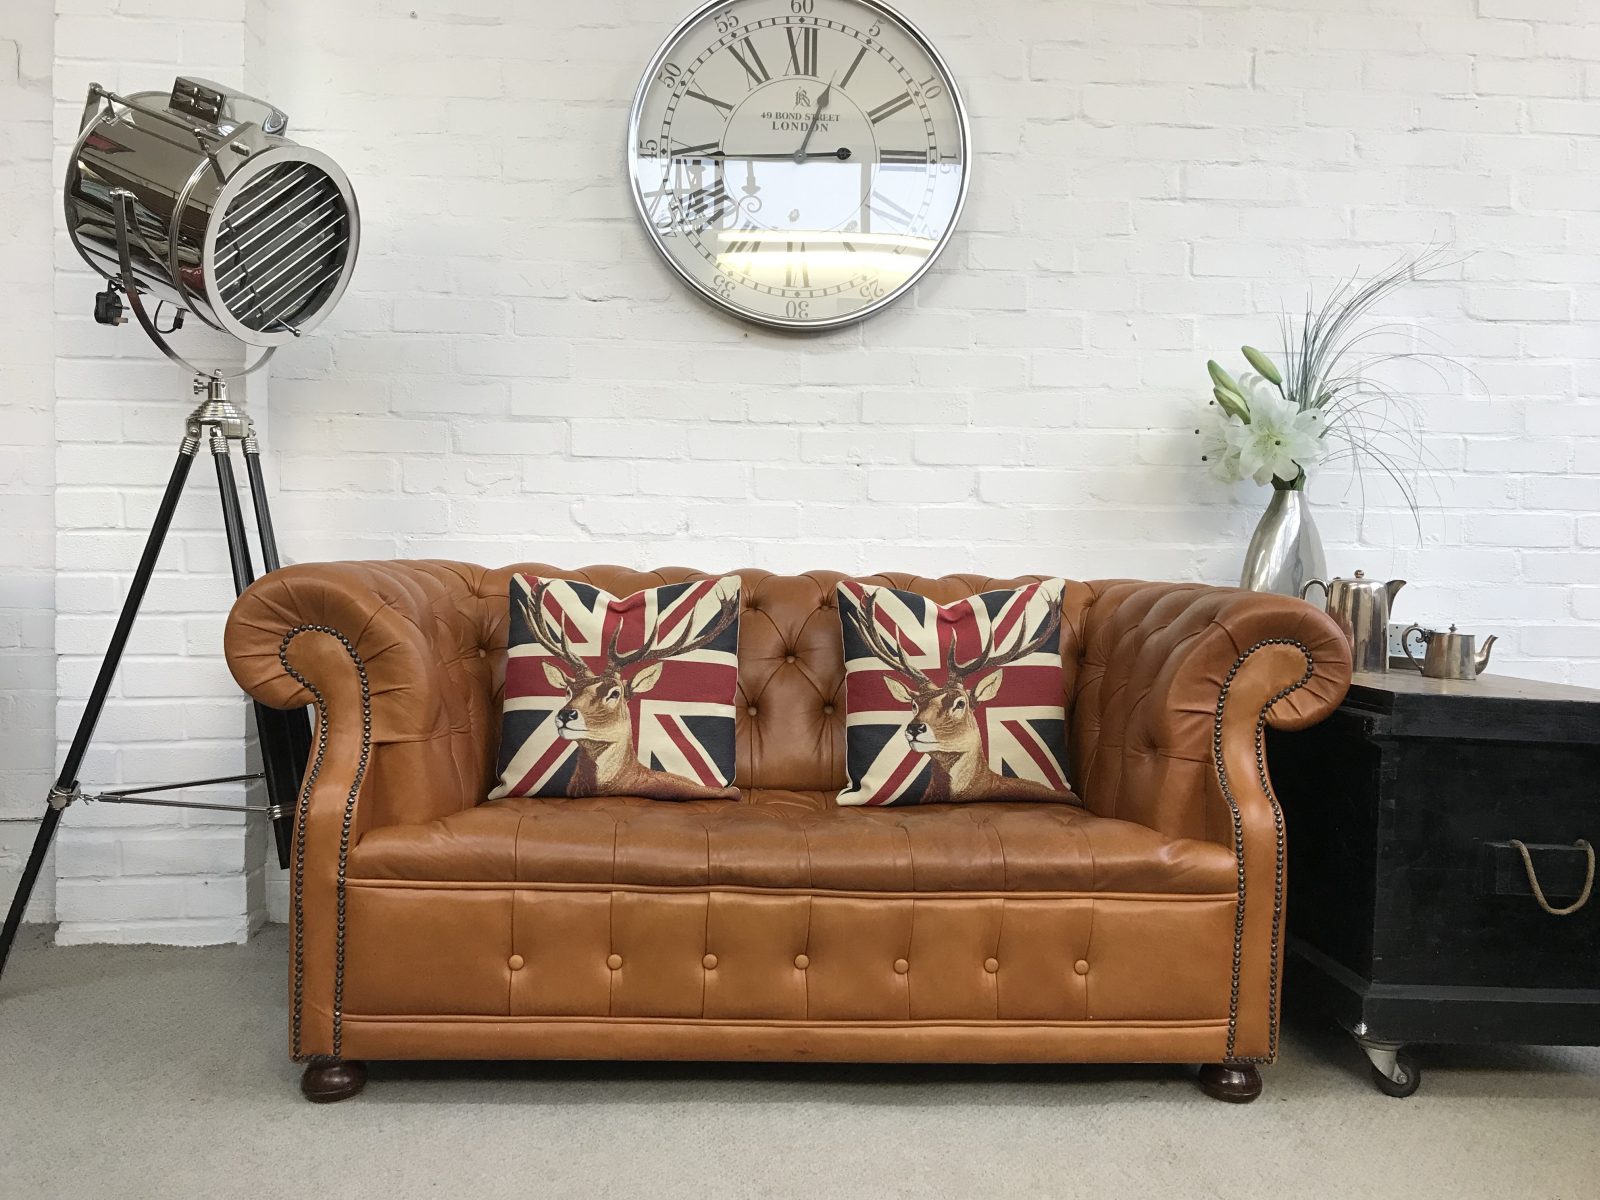 Saddle Tan Chesterfield Sofa And Footstool.